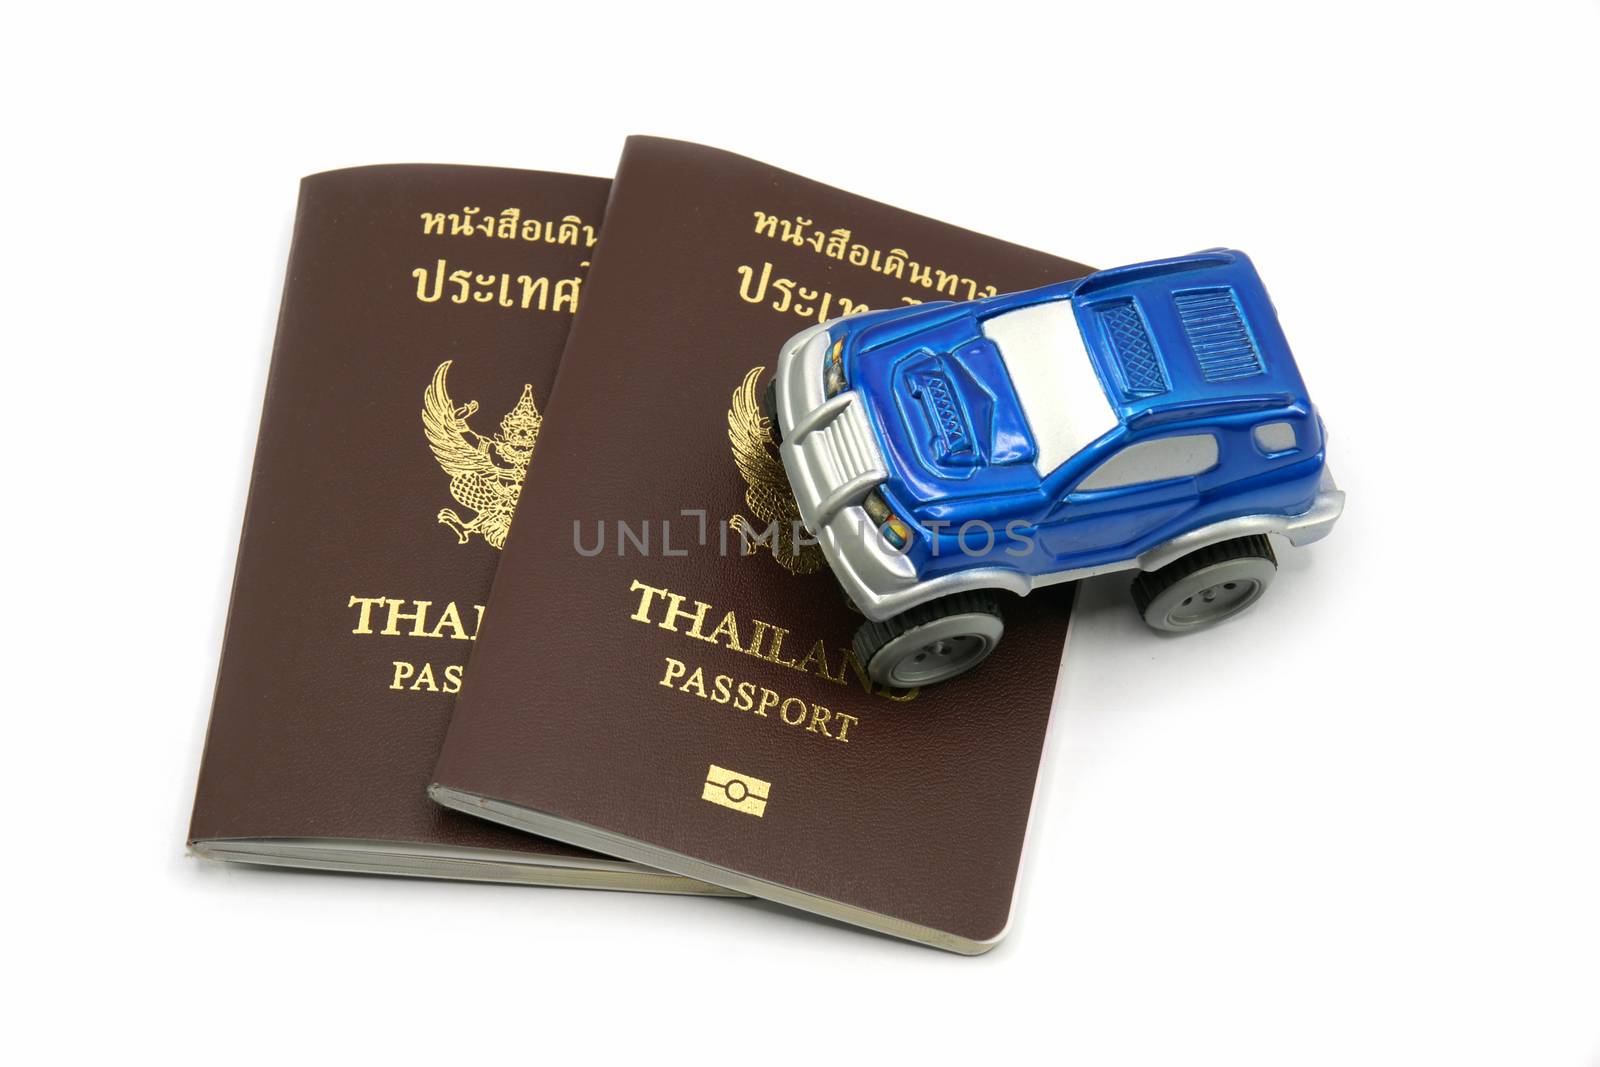 Thailand Passport and 4wd Car for Travel Concept. by mranucha